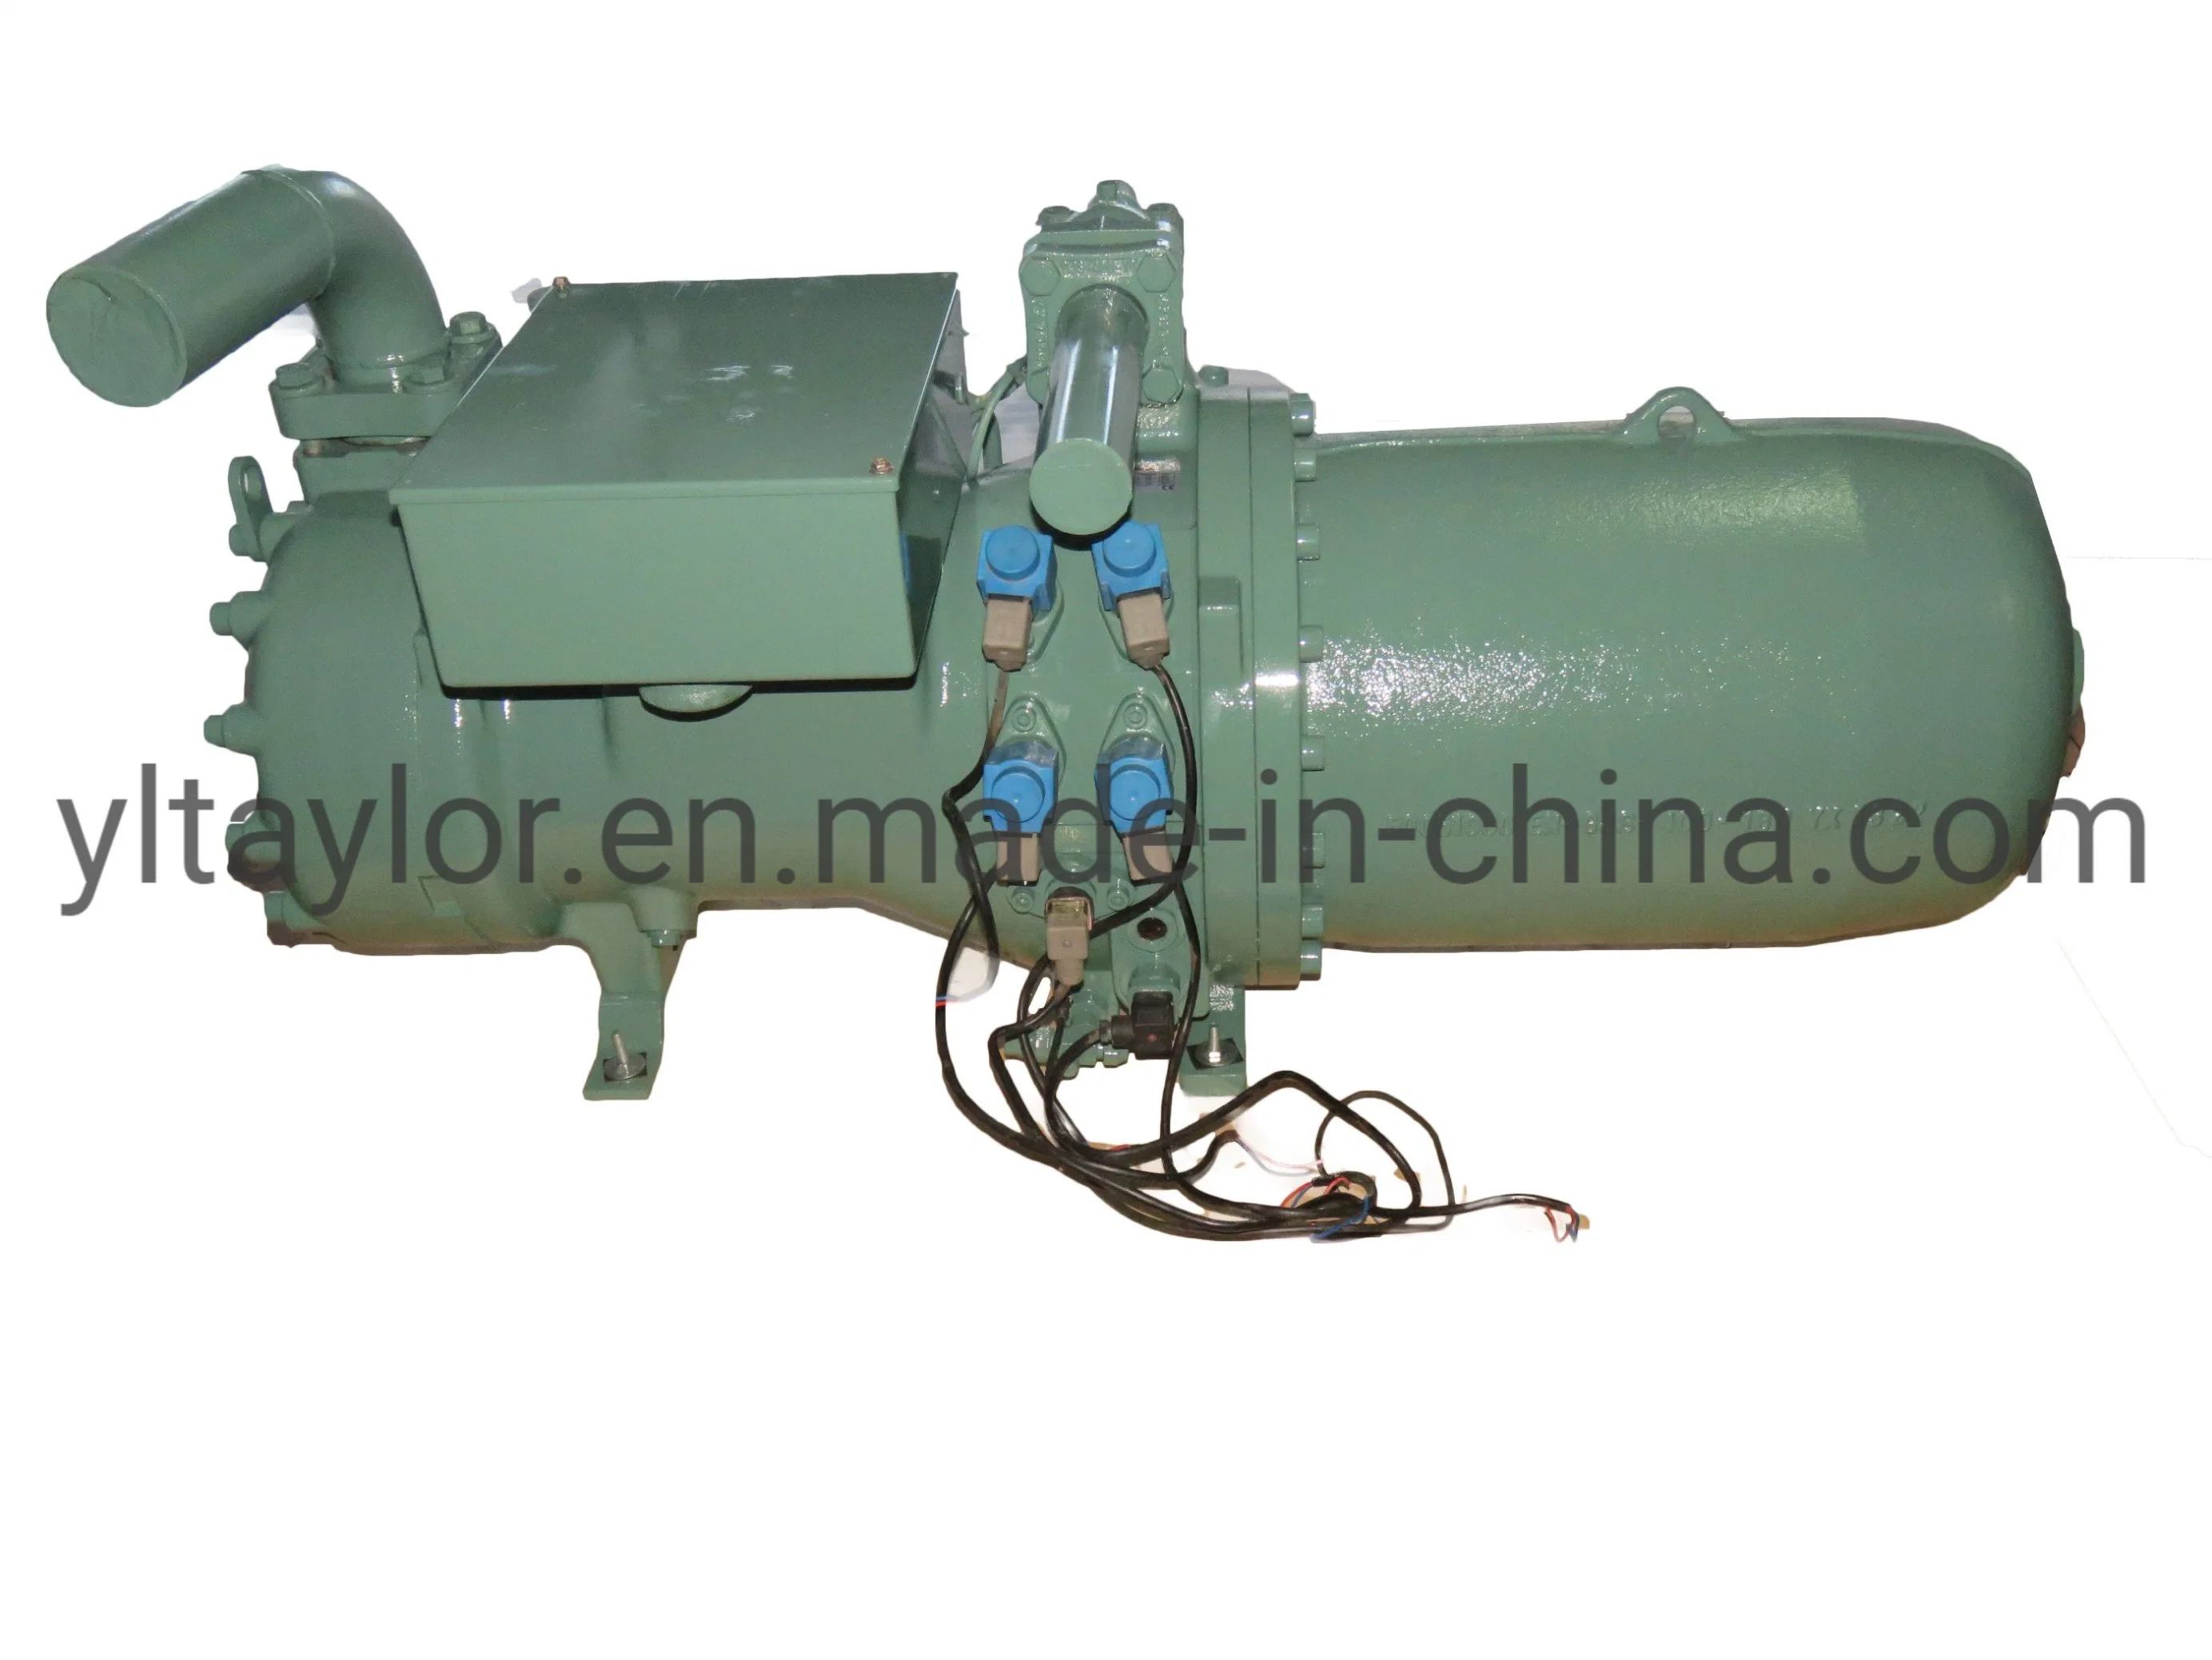 Csh6563-60y 60HP Screw Type Refrigeration Compressor for Commercial Air Conditioning